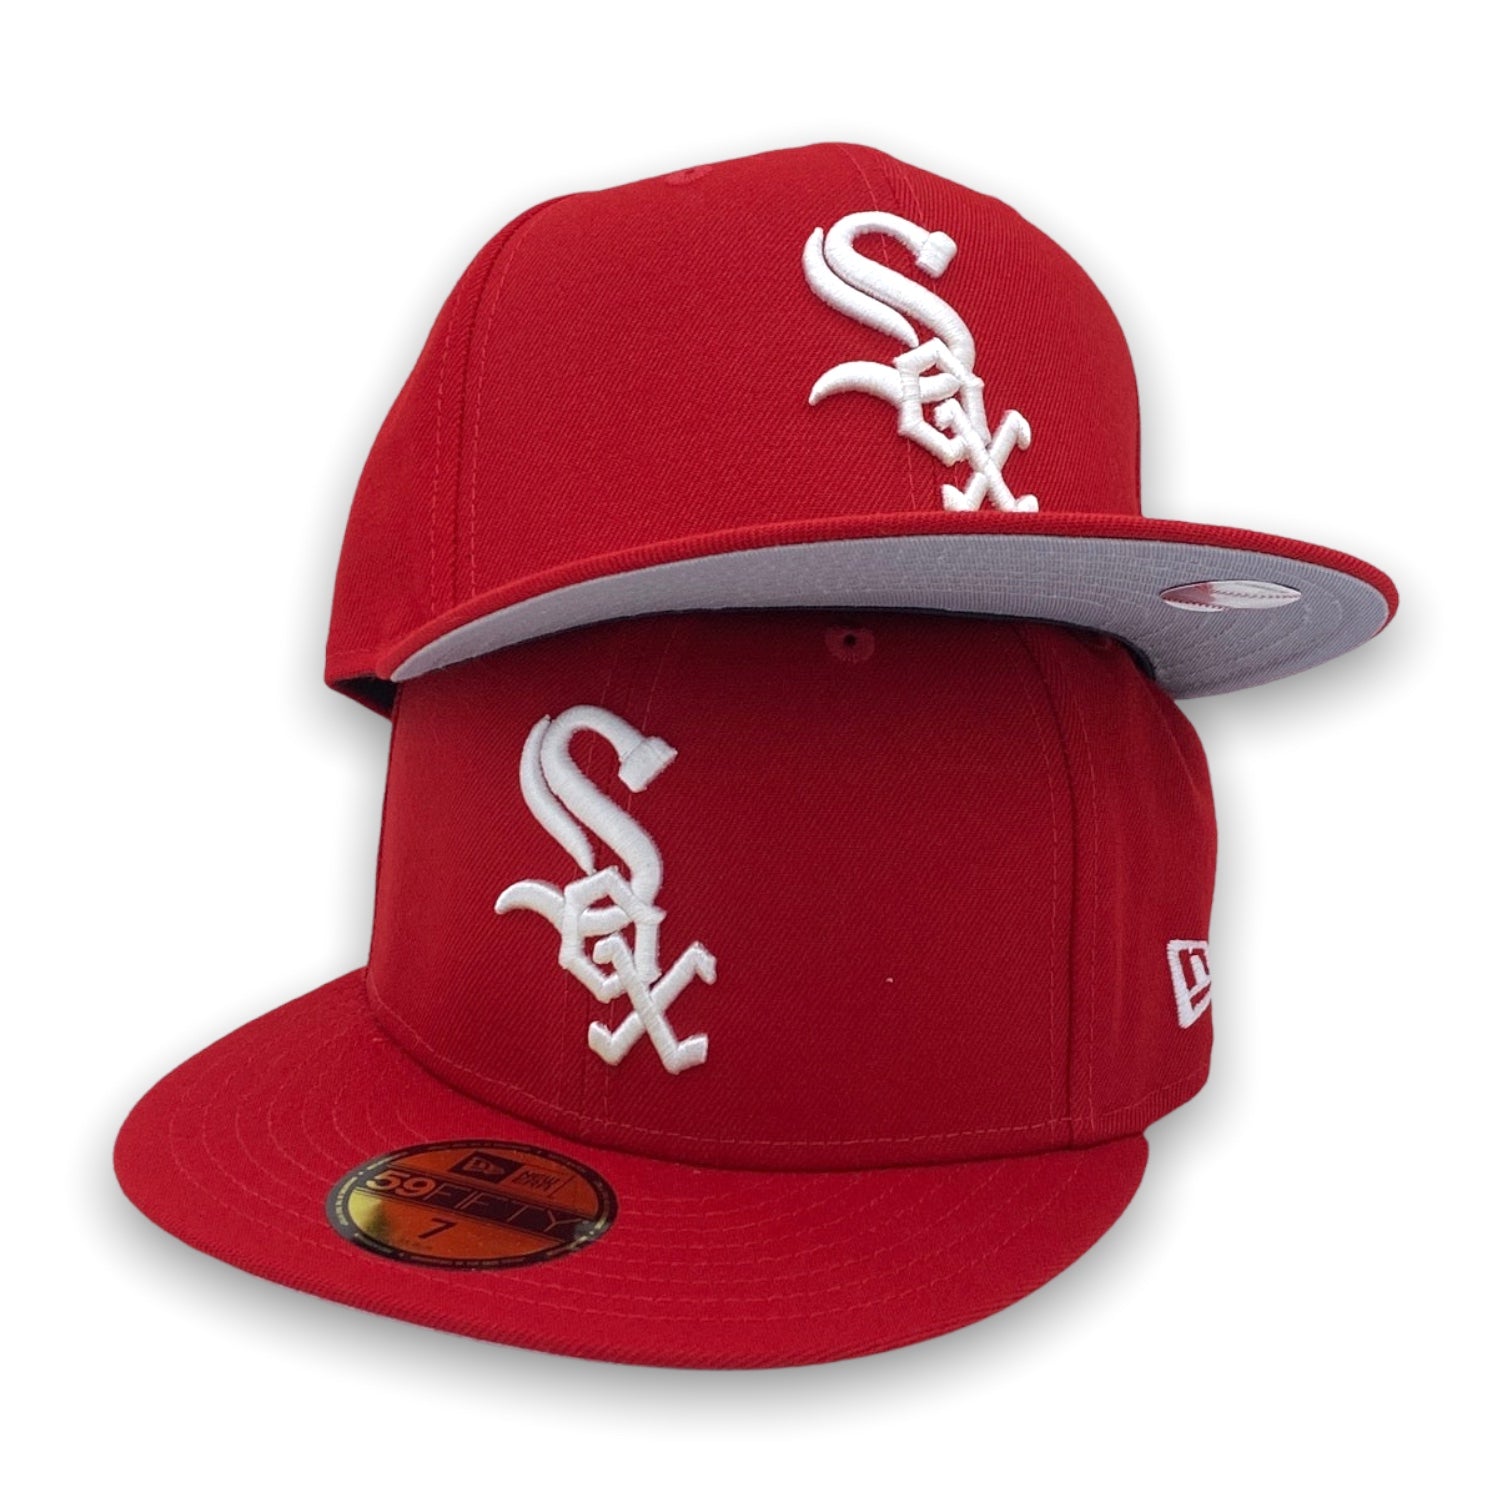 White Fitted Boston Red Sox Hat